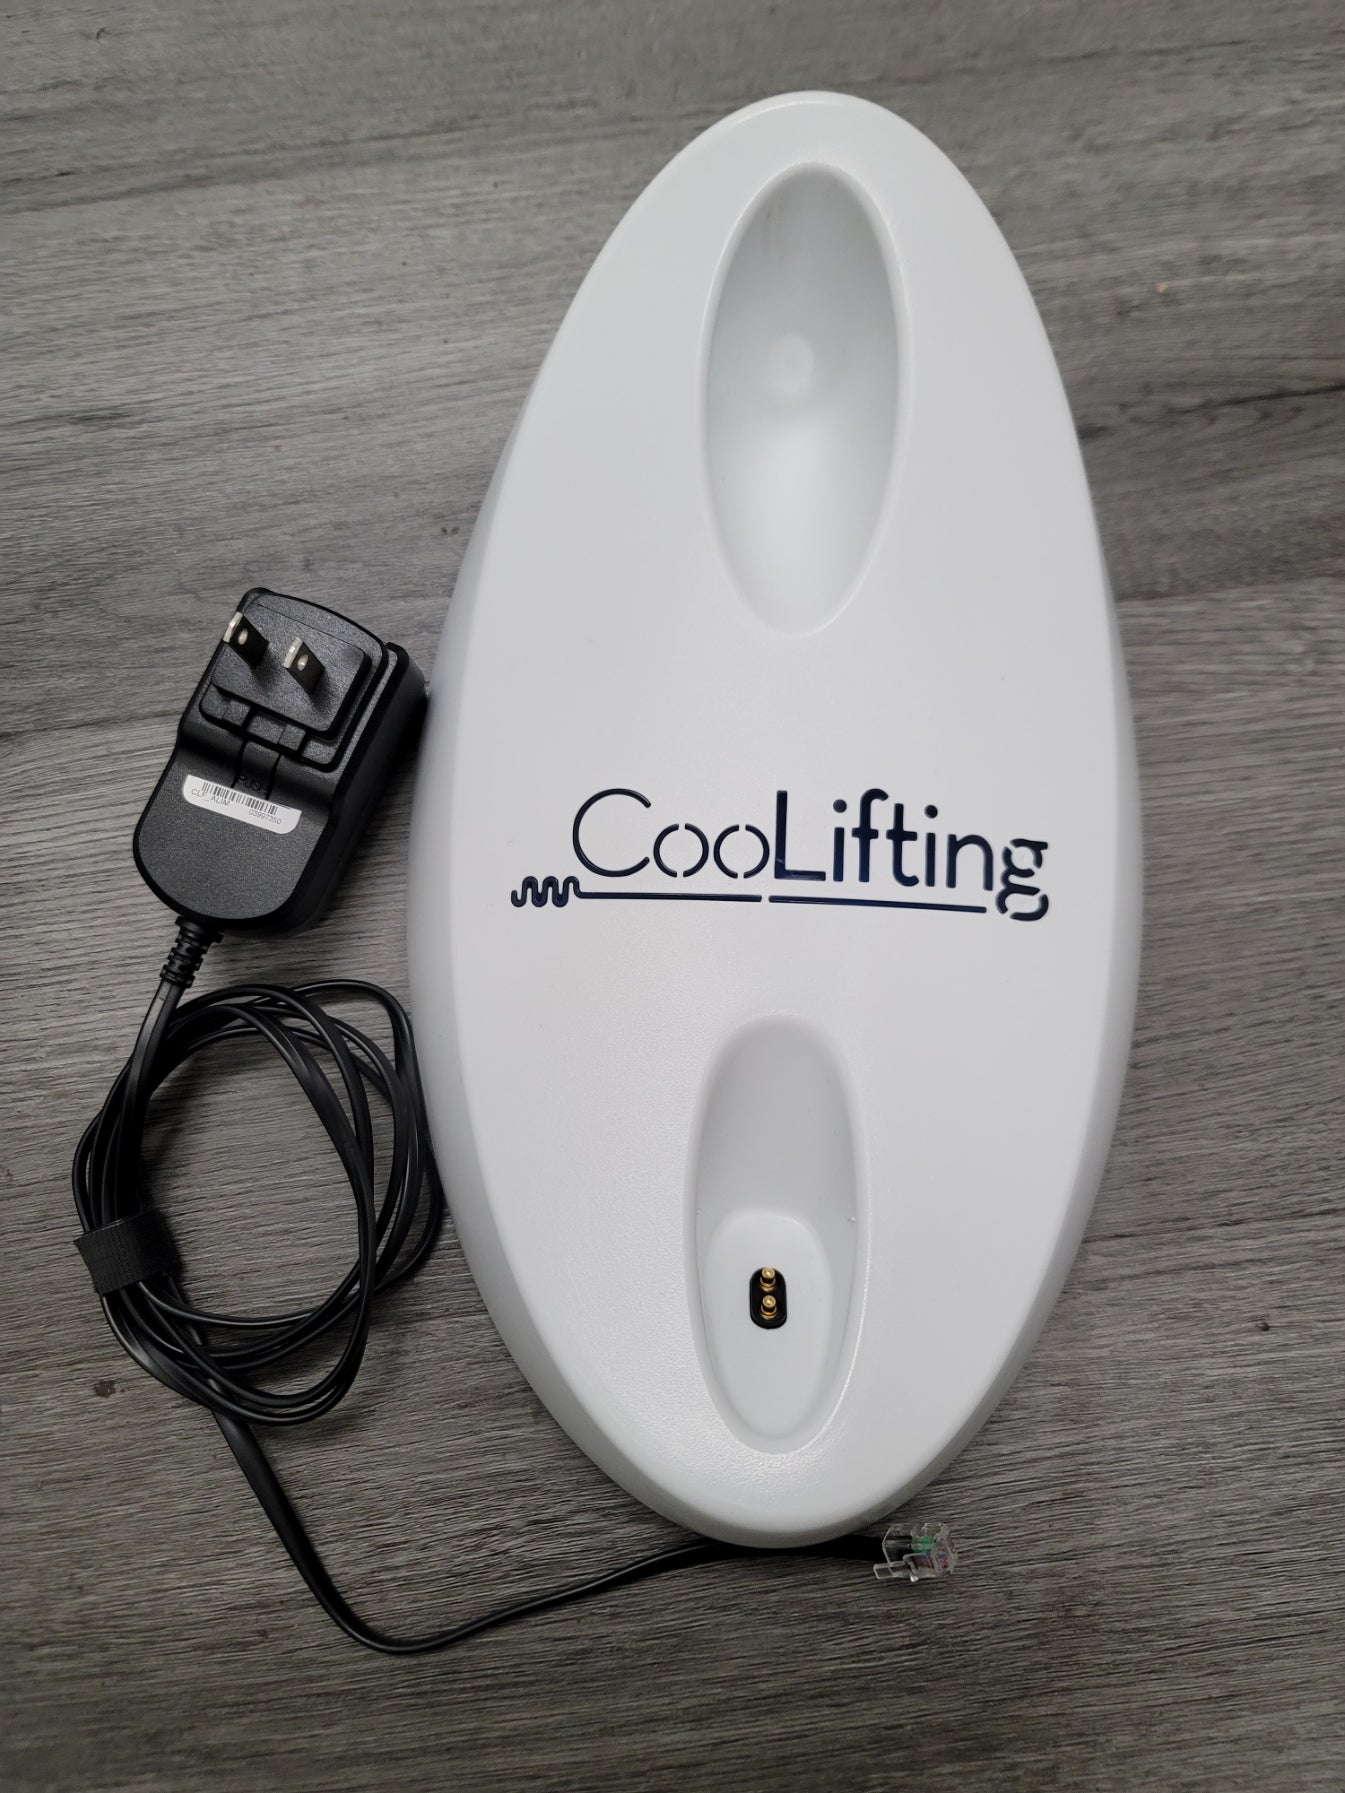 Coolifting Charging Base and AC Charging Cable (US Style)